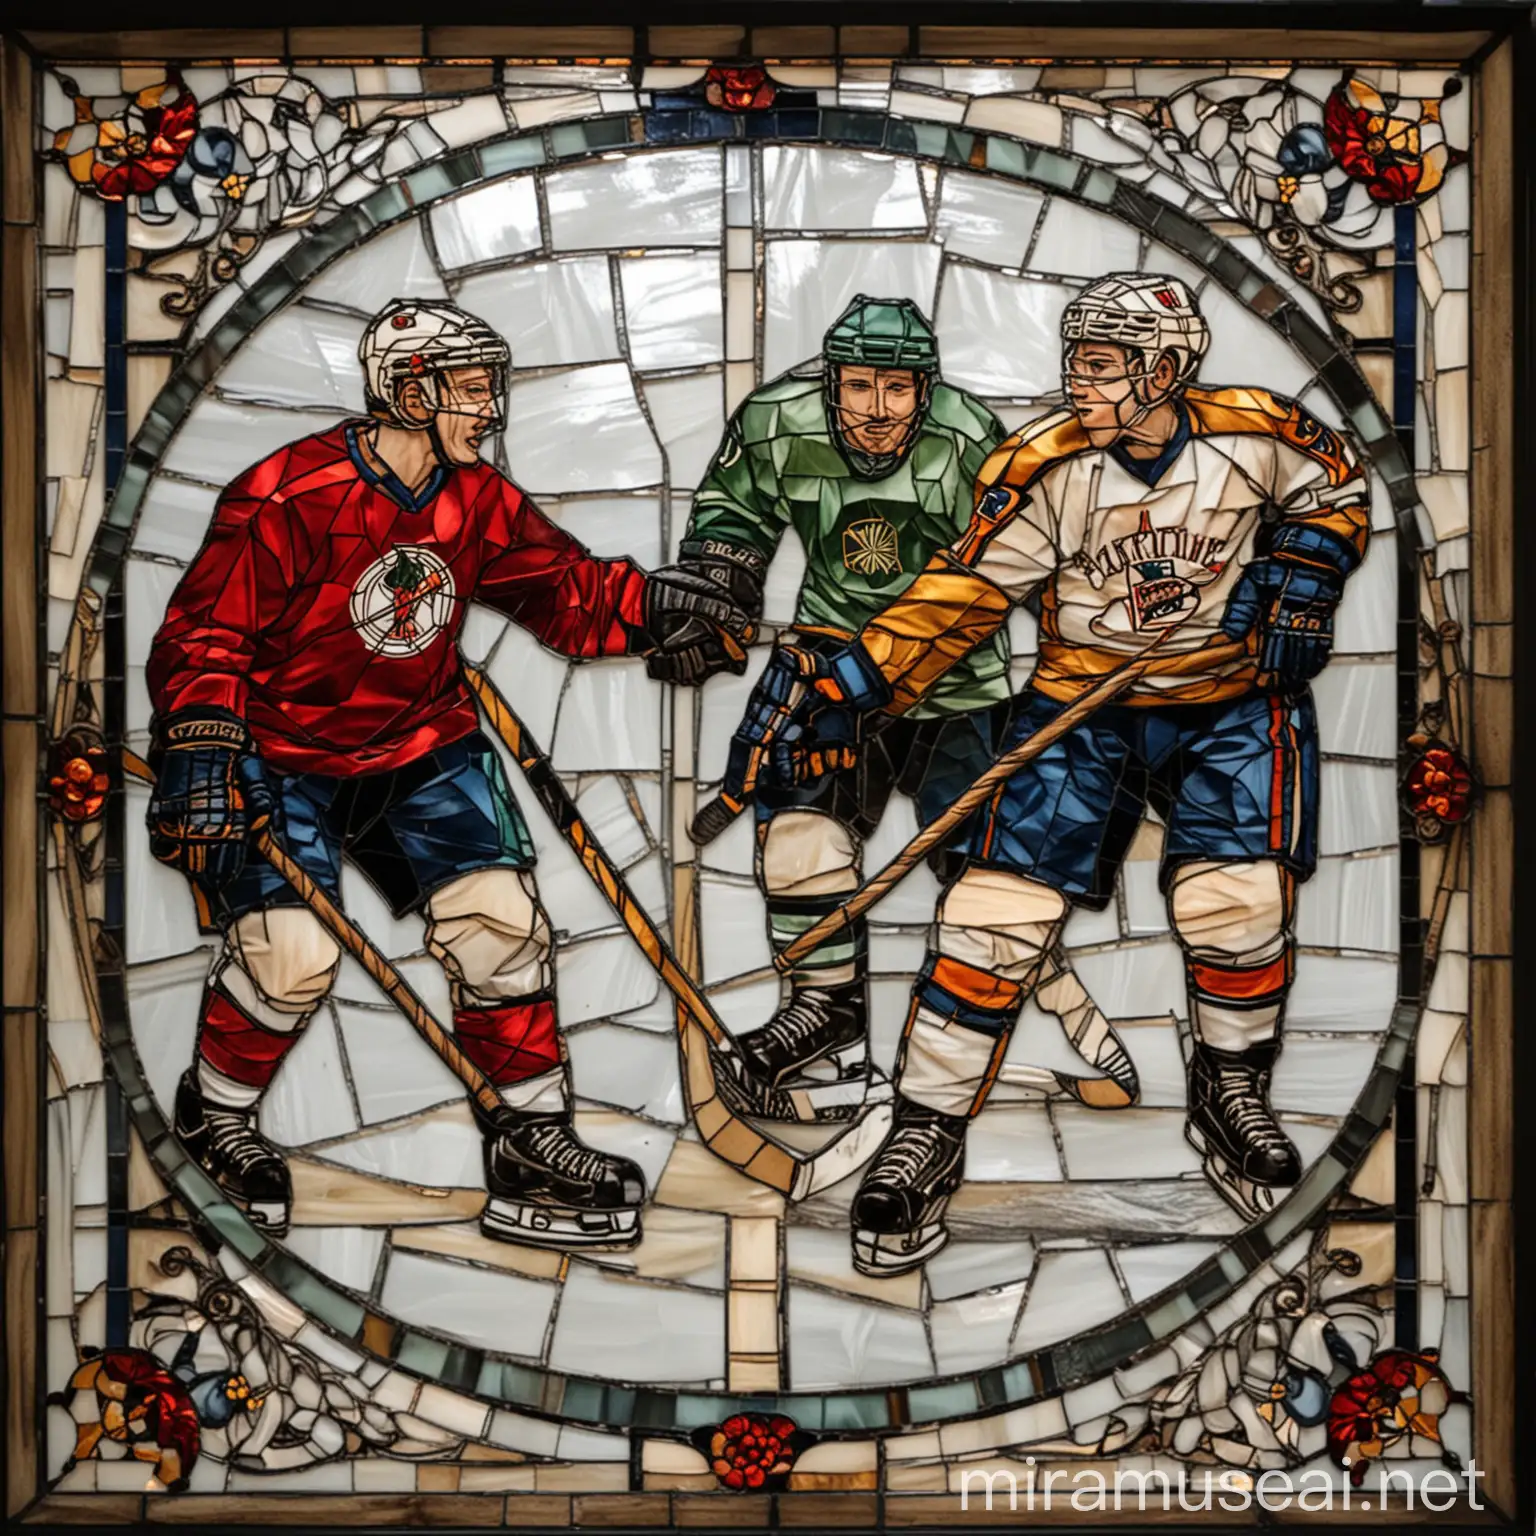 Dynamic Hockey Players in Stained Glass Mosaic Art